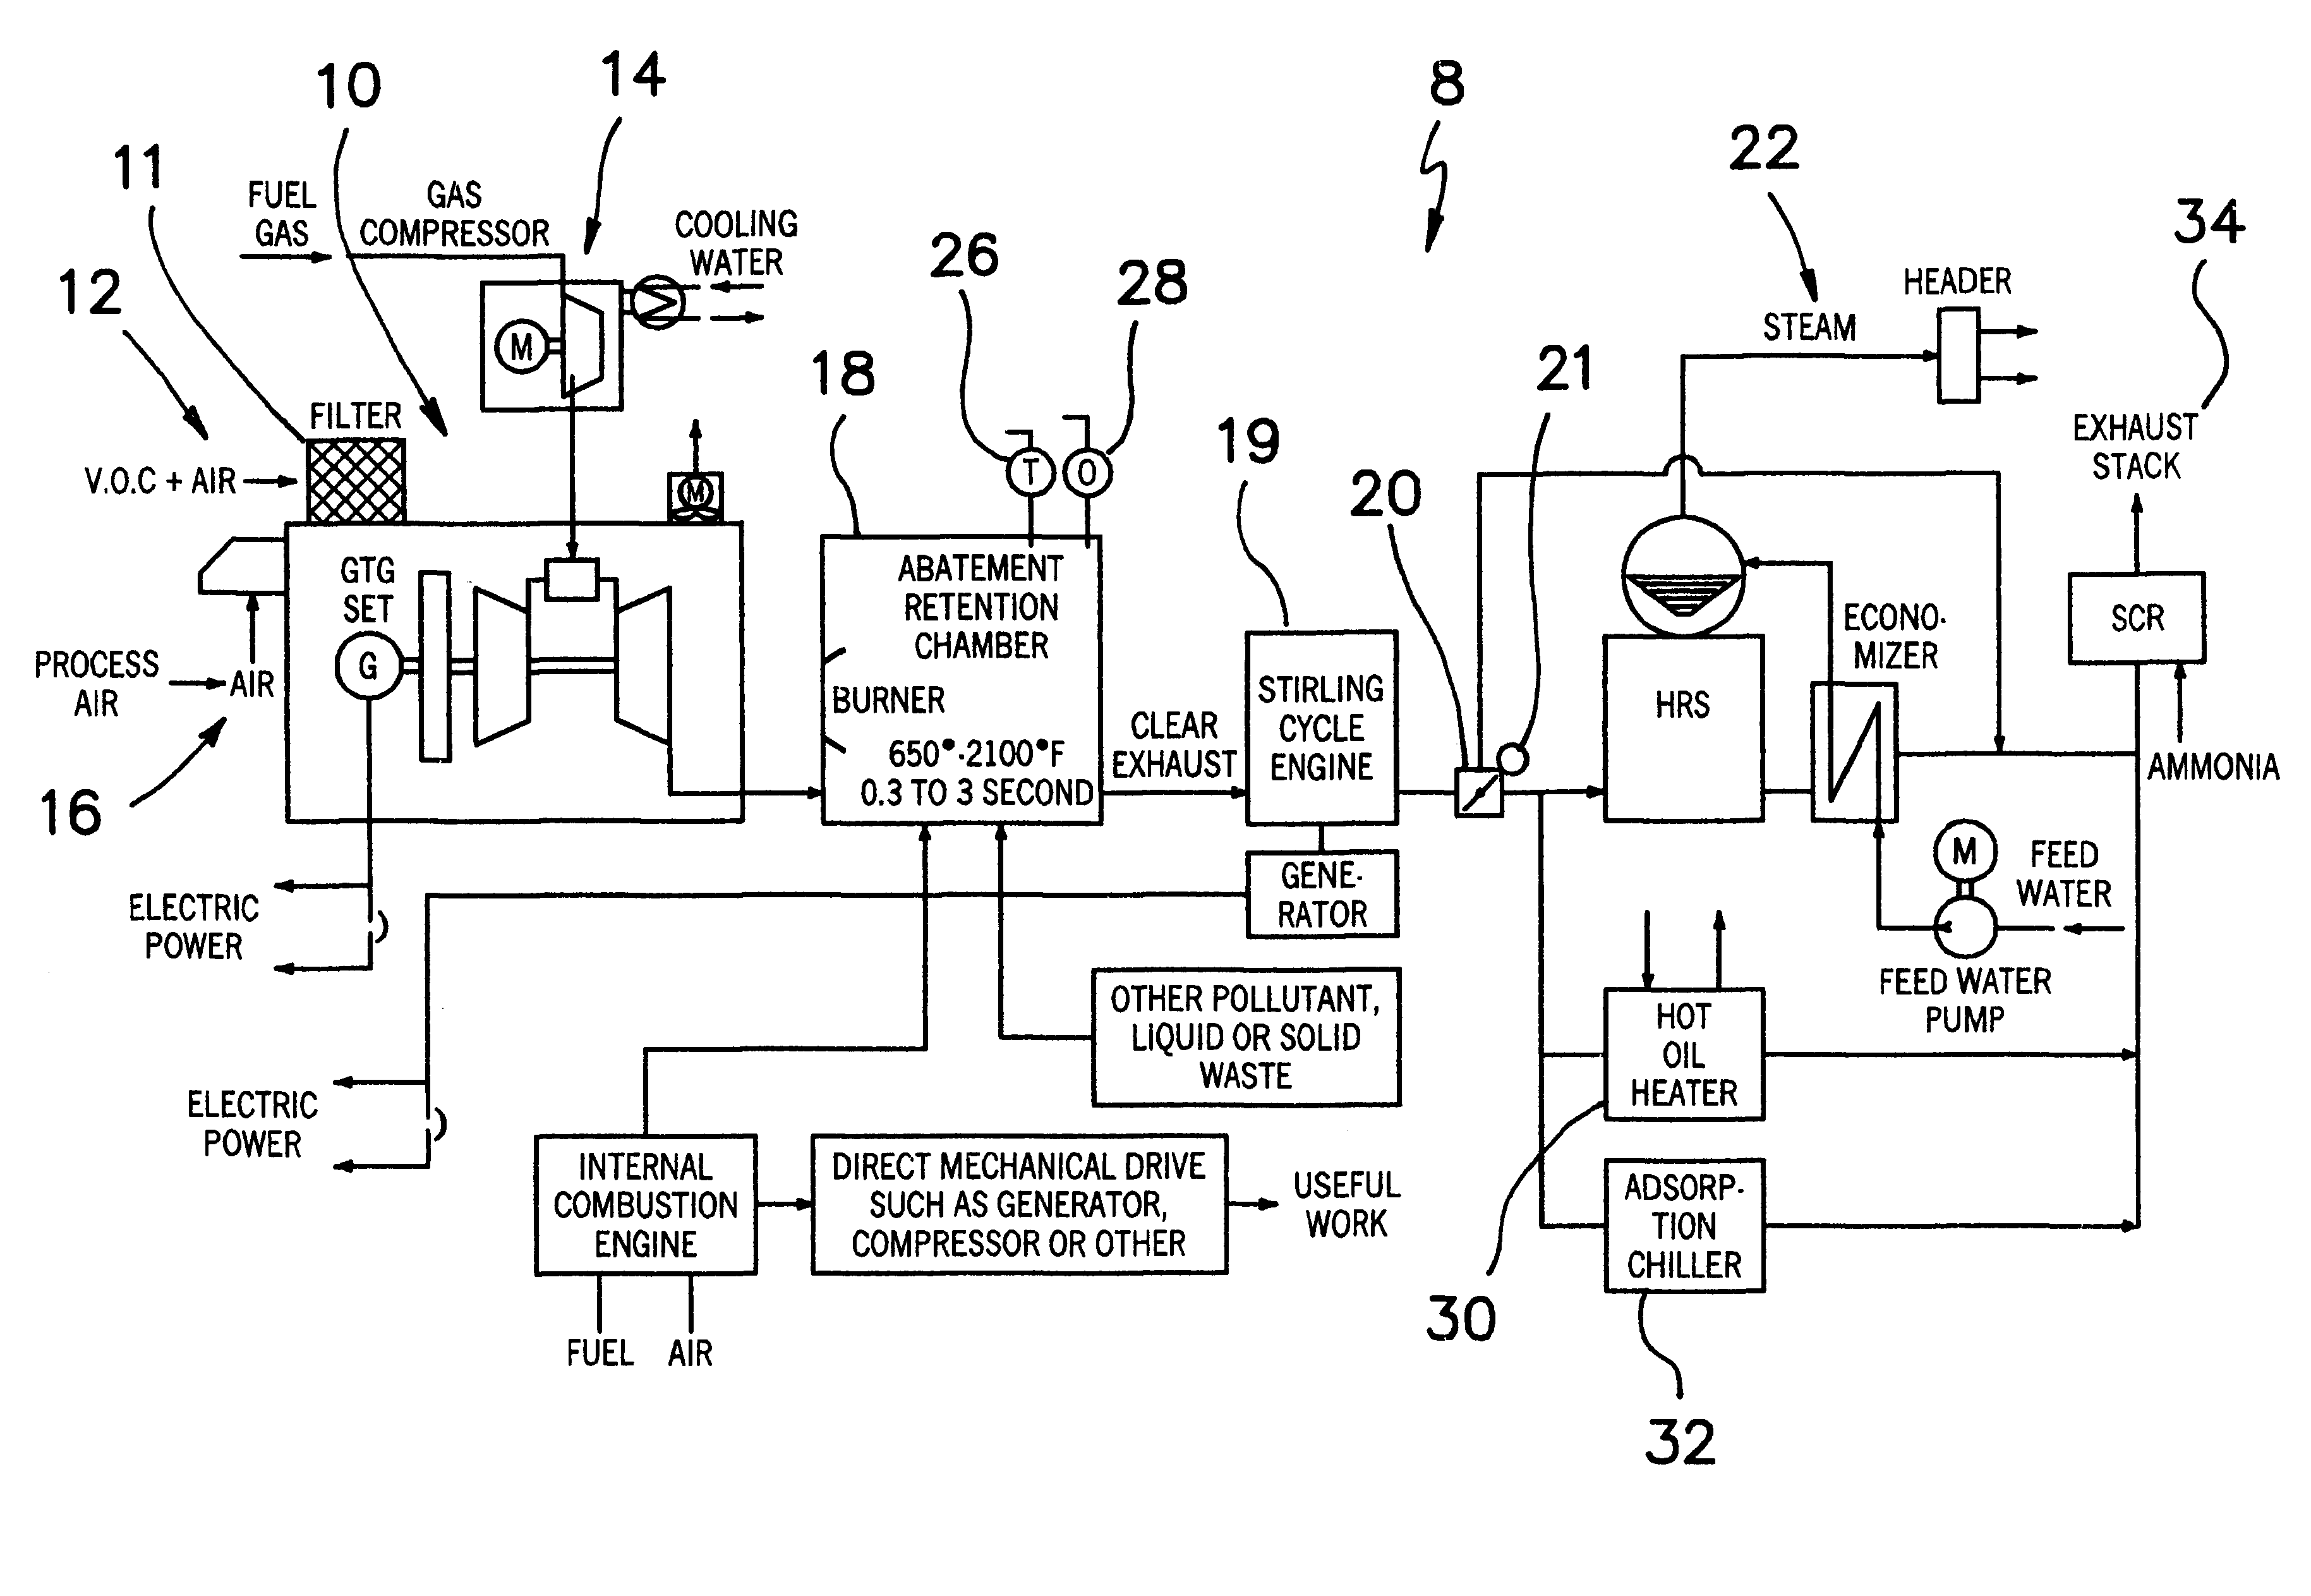 Advanced combined cycle co-generation abatement system